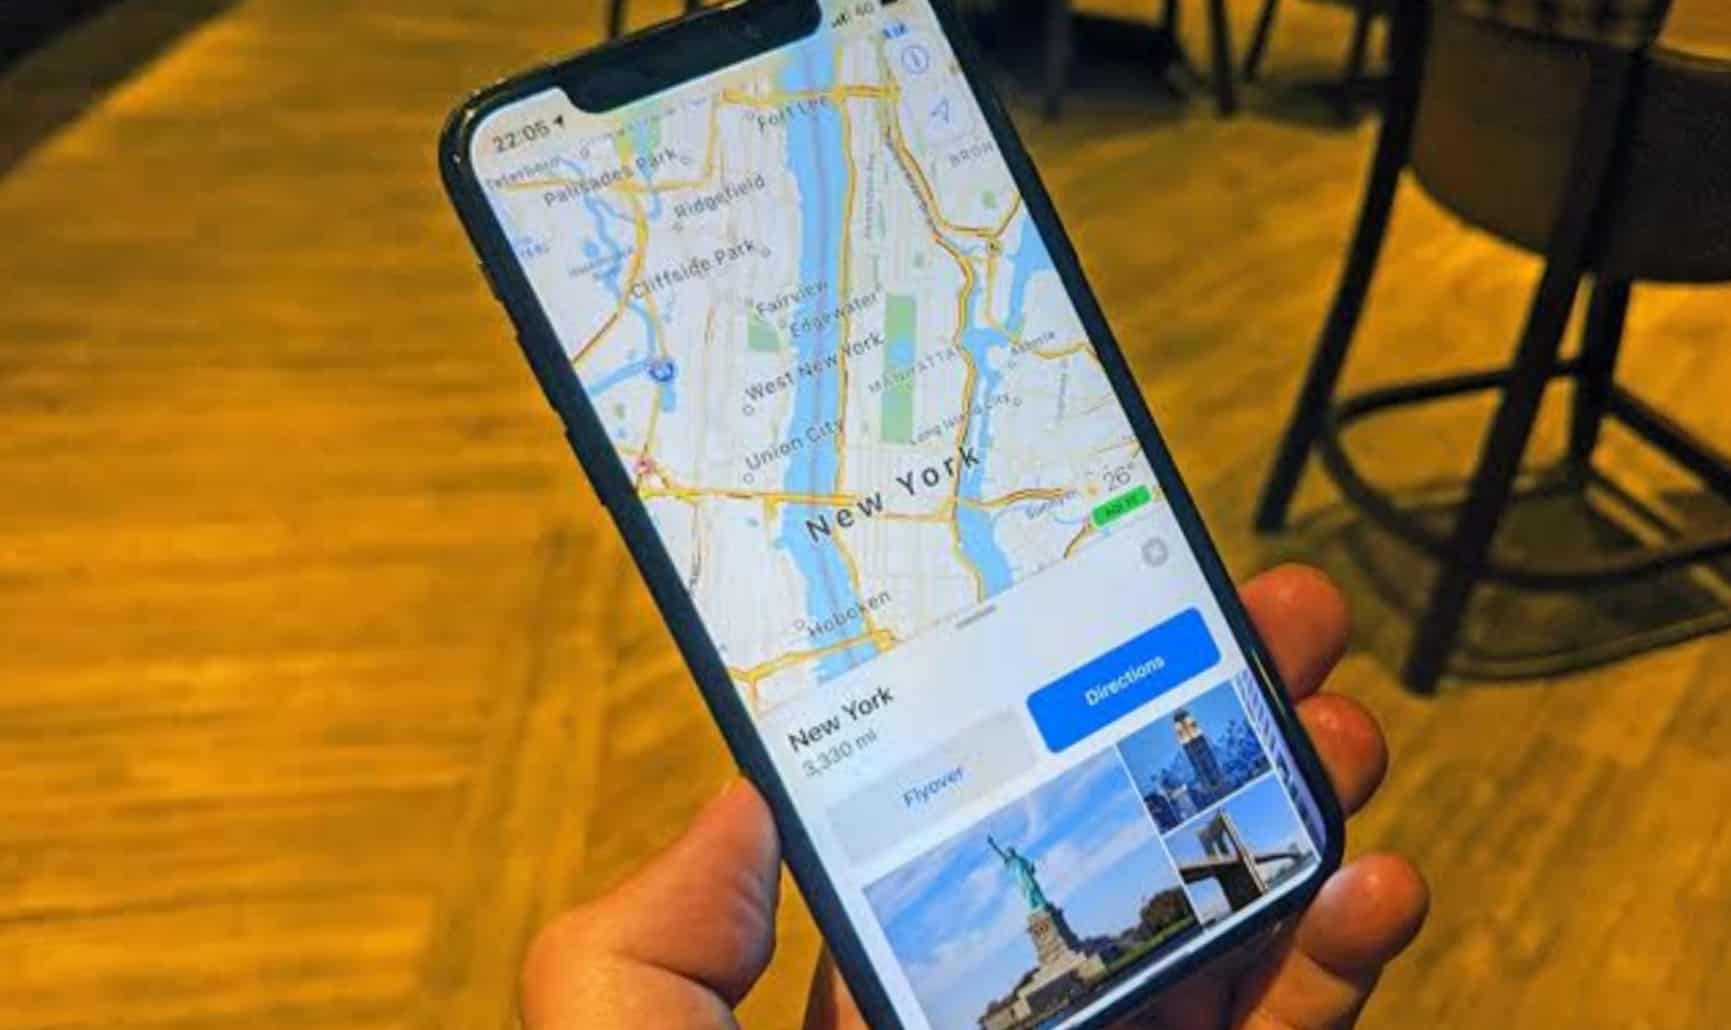 Apple Maps Expands Its Speed Camera Feature to More Countries